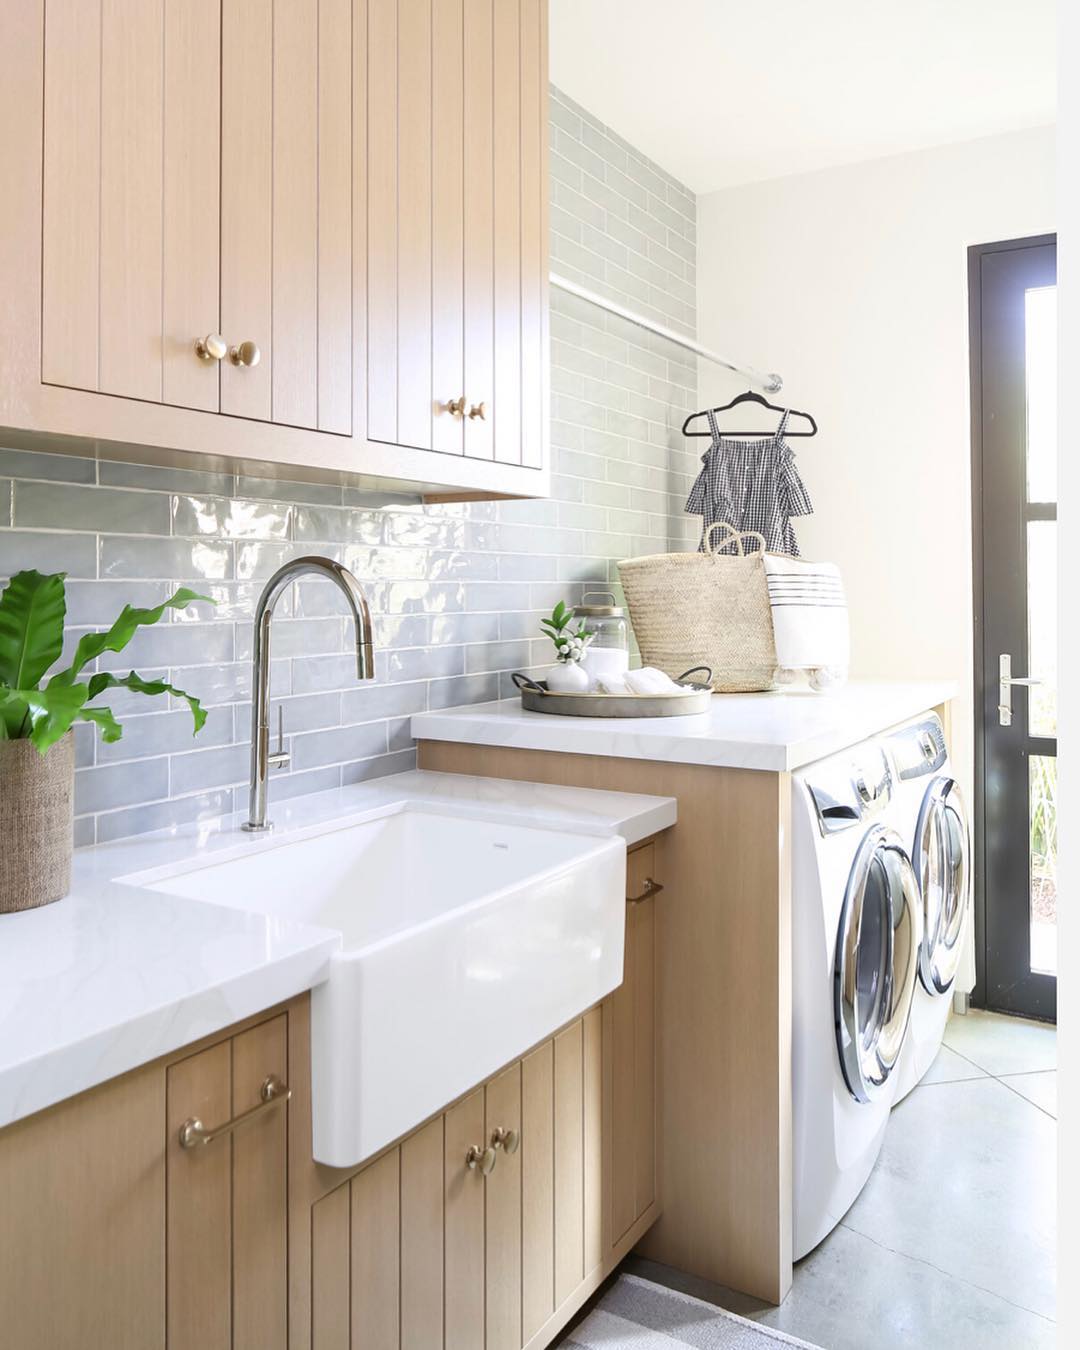 Farmhouse laundry room. Photo by Instagram user @brookewagnerdesign